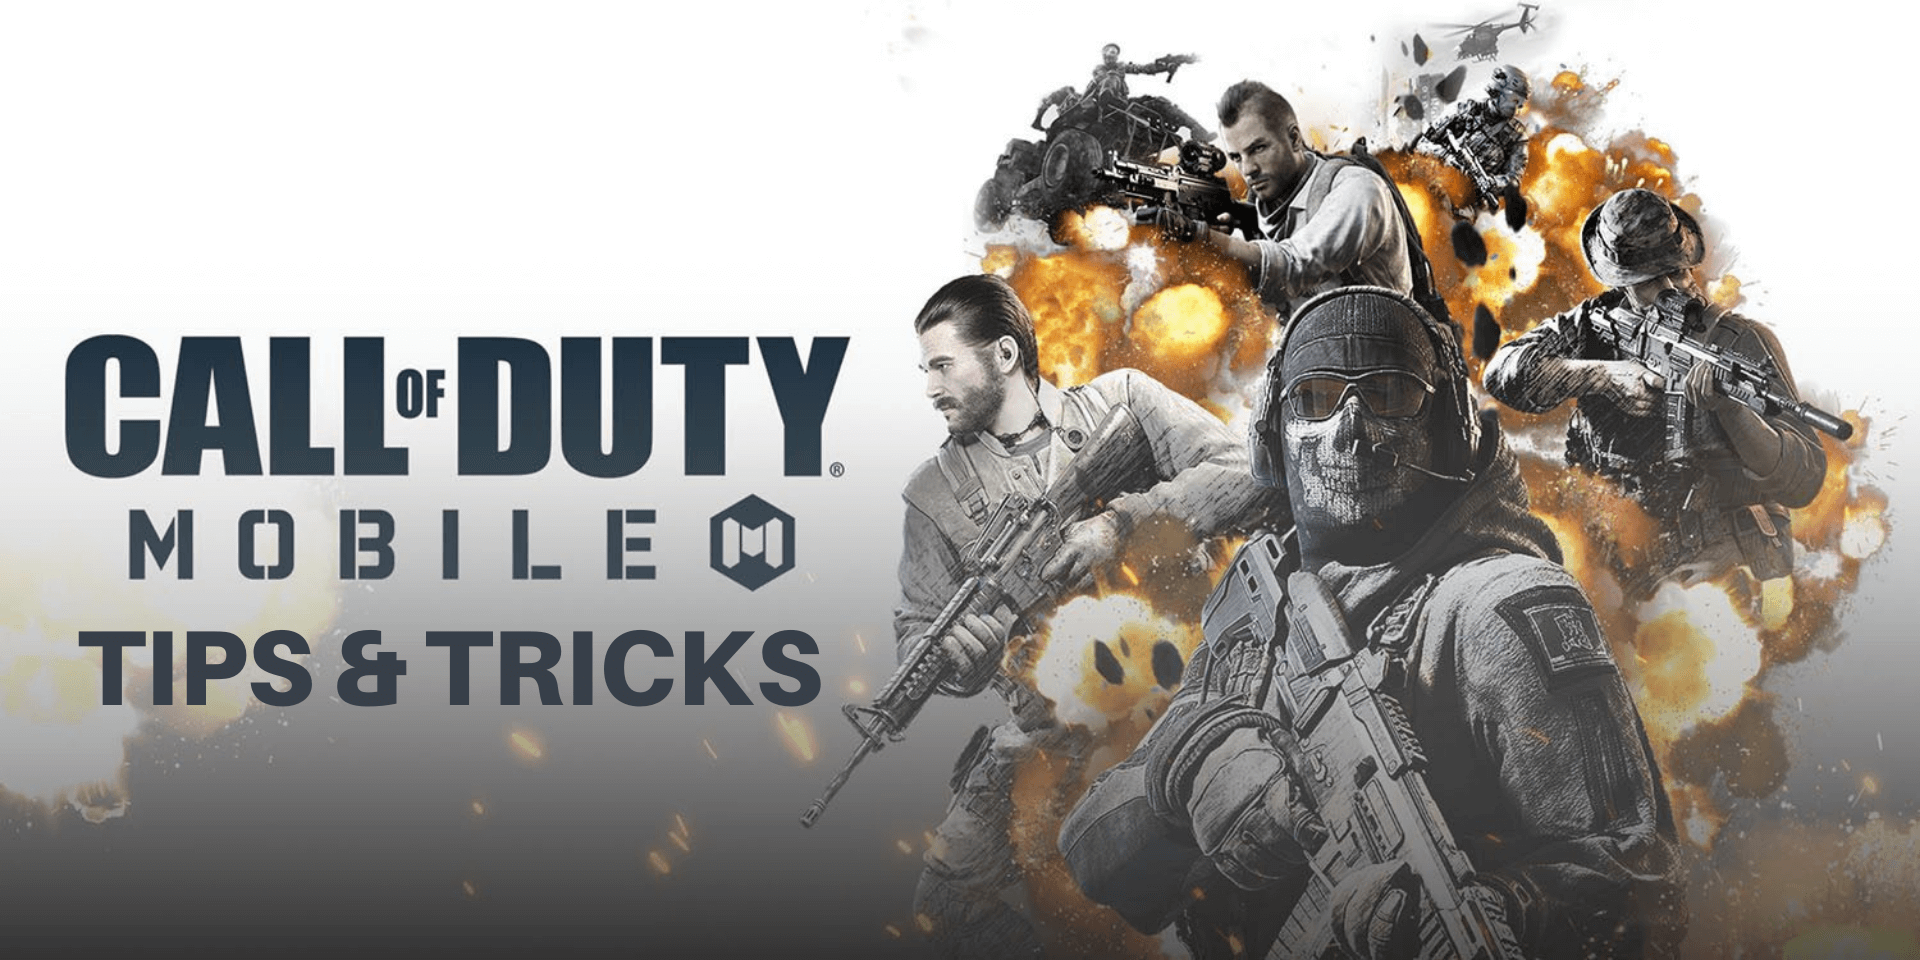 Call of duty mobile Tips & Tricks